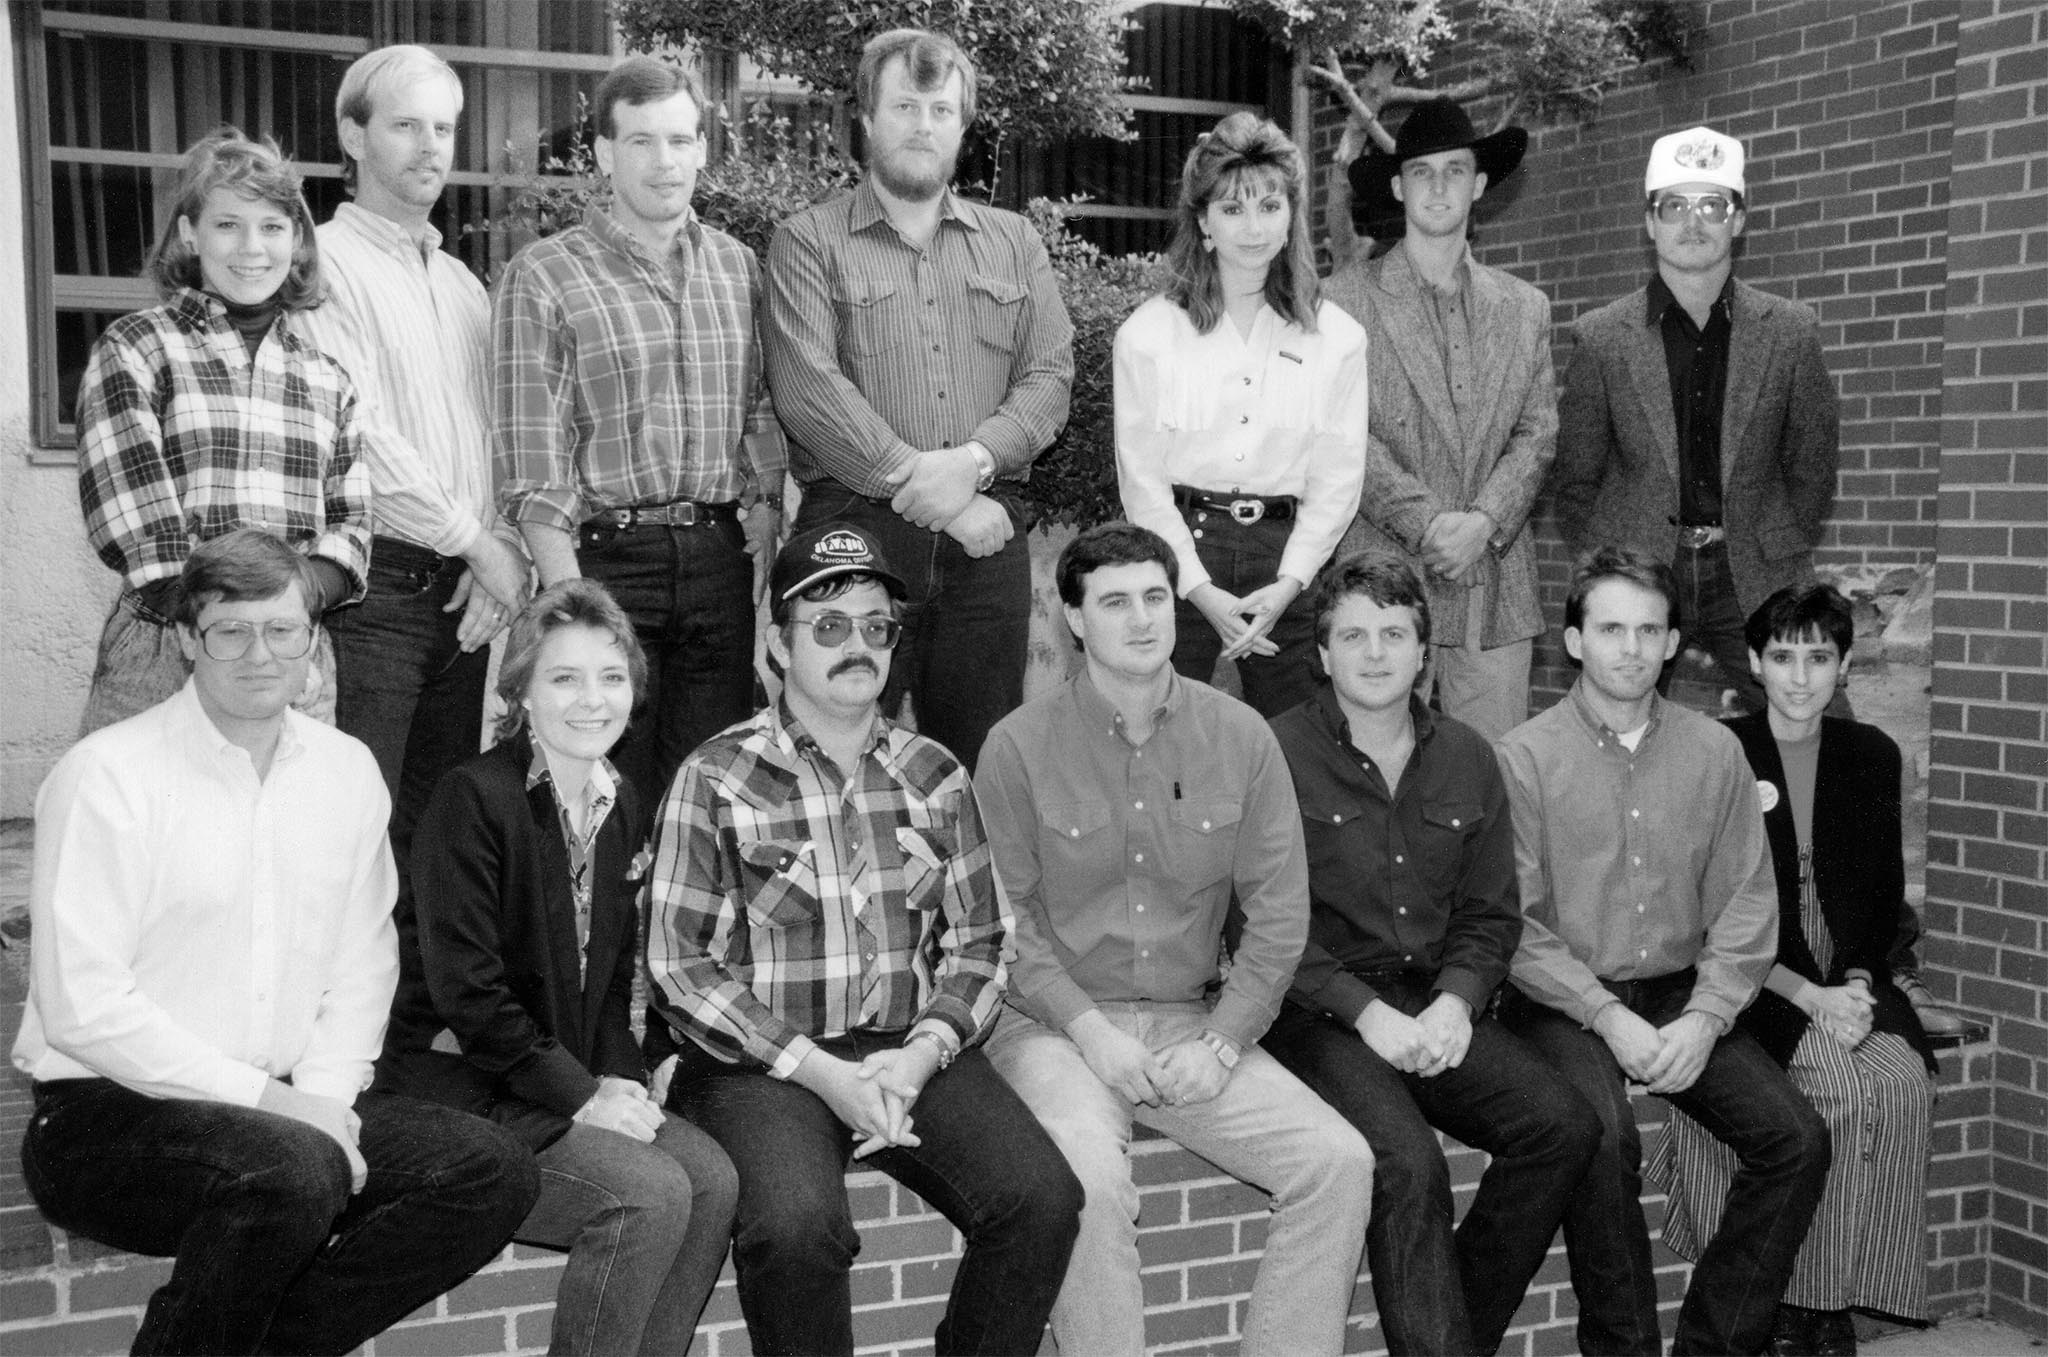 This photo features the 1992 OKFB state Young Farmers & Ranchers Committee. Back row are (left to right) Barbie Deevers from the American Farm Bureau Federation YF&R Committee, Thad Doye, Howard Bartel, Jimmy Mabry, Becky Clovis, Leross Apple and Joe Parker. Front row are (left to right) Kevin Deevers from the AFBF YF&R Committee, Jessi Farmer, Francis Parizek, Rick Clovis, Brian Lebeda, Jimmy Fruedenberger and Kelli Parker.